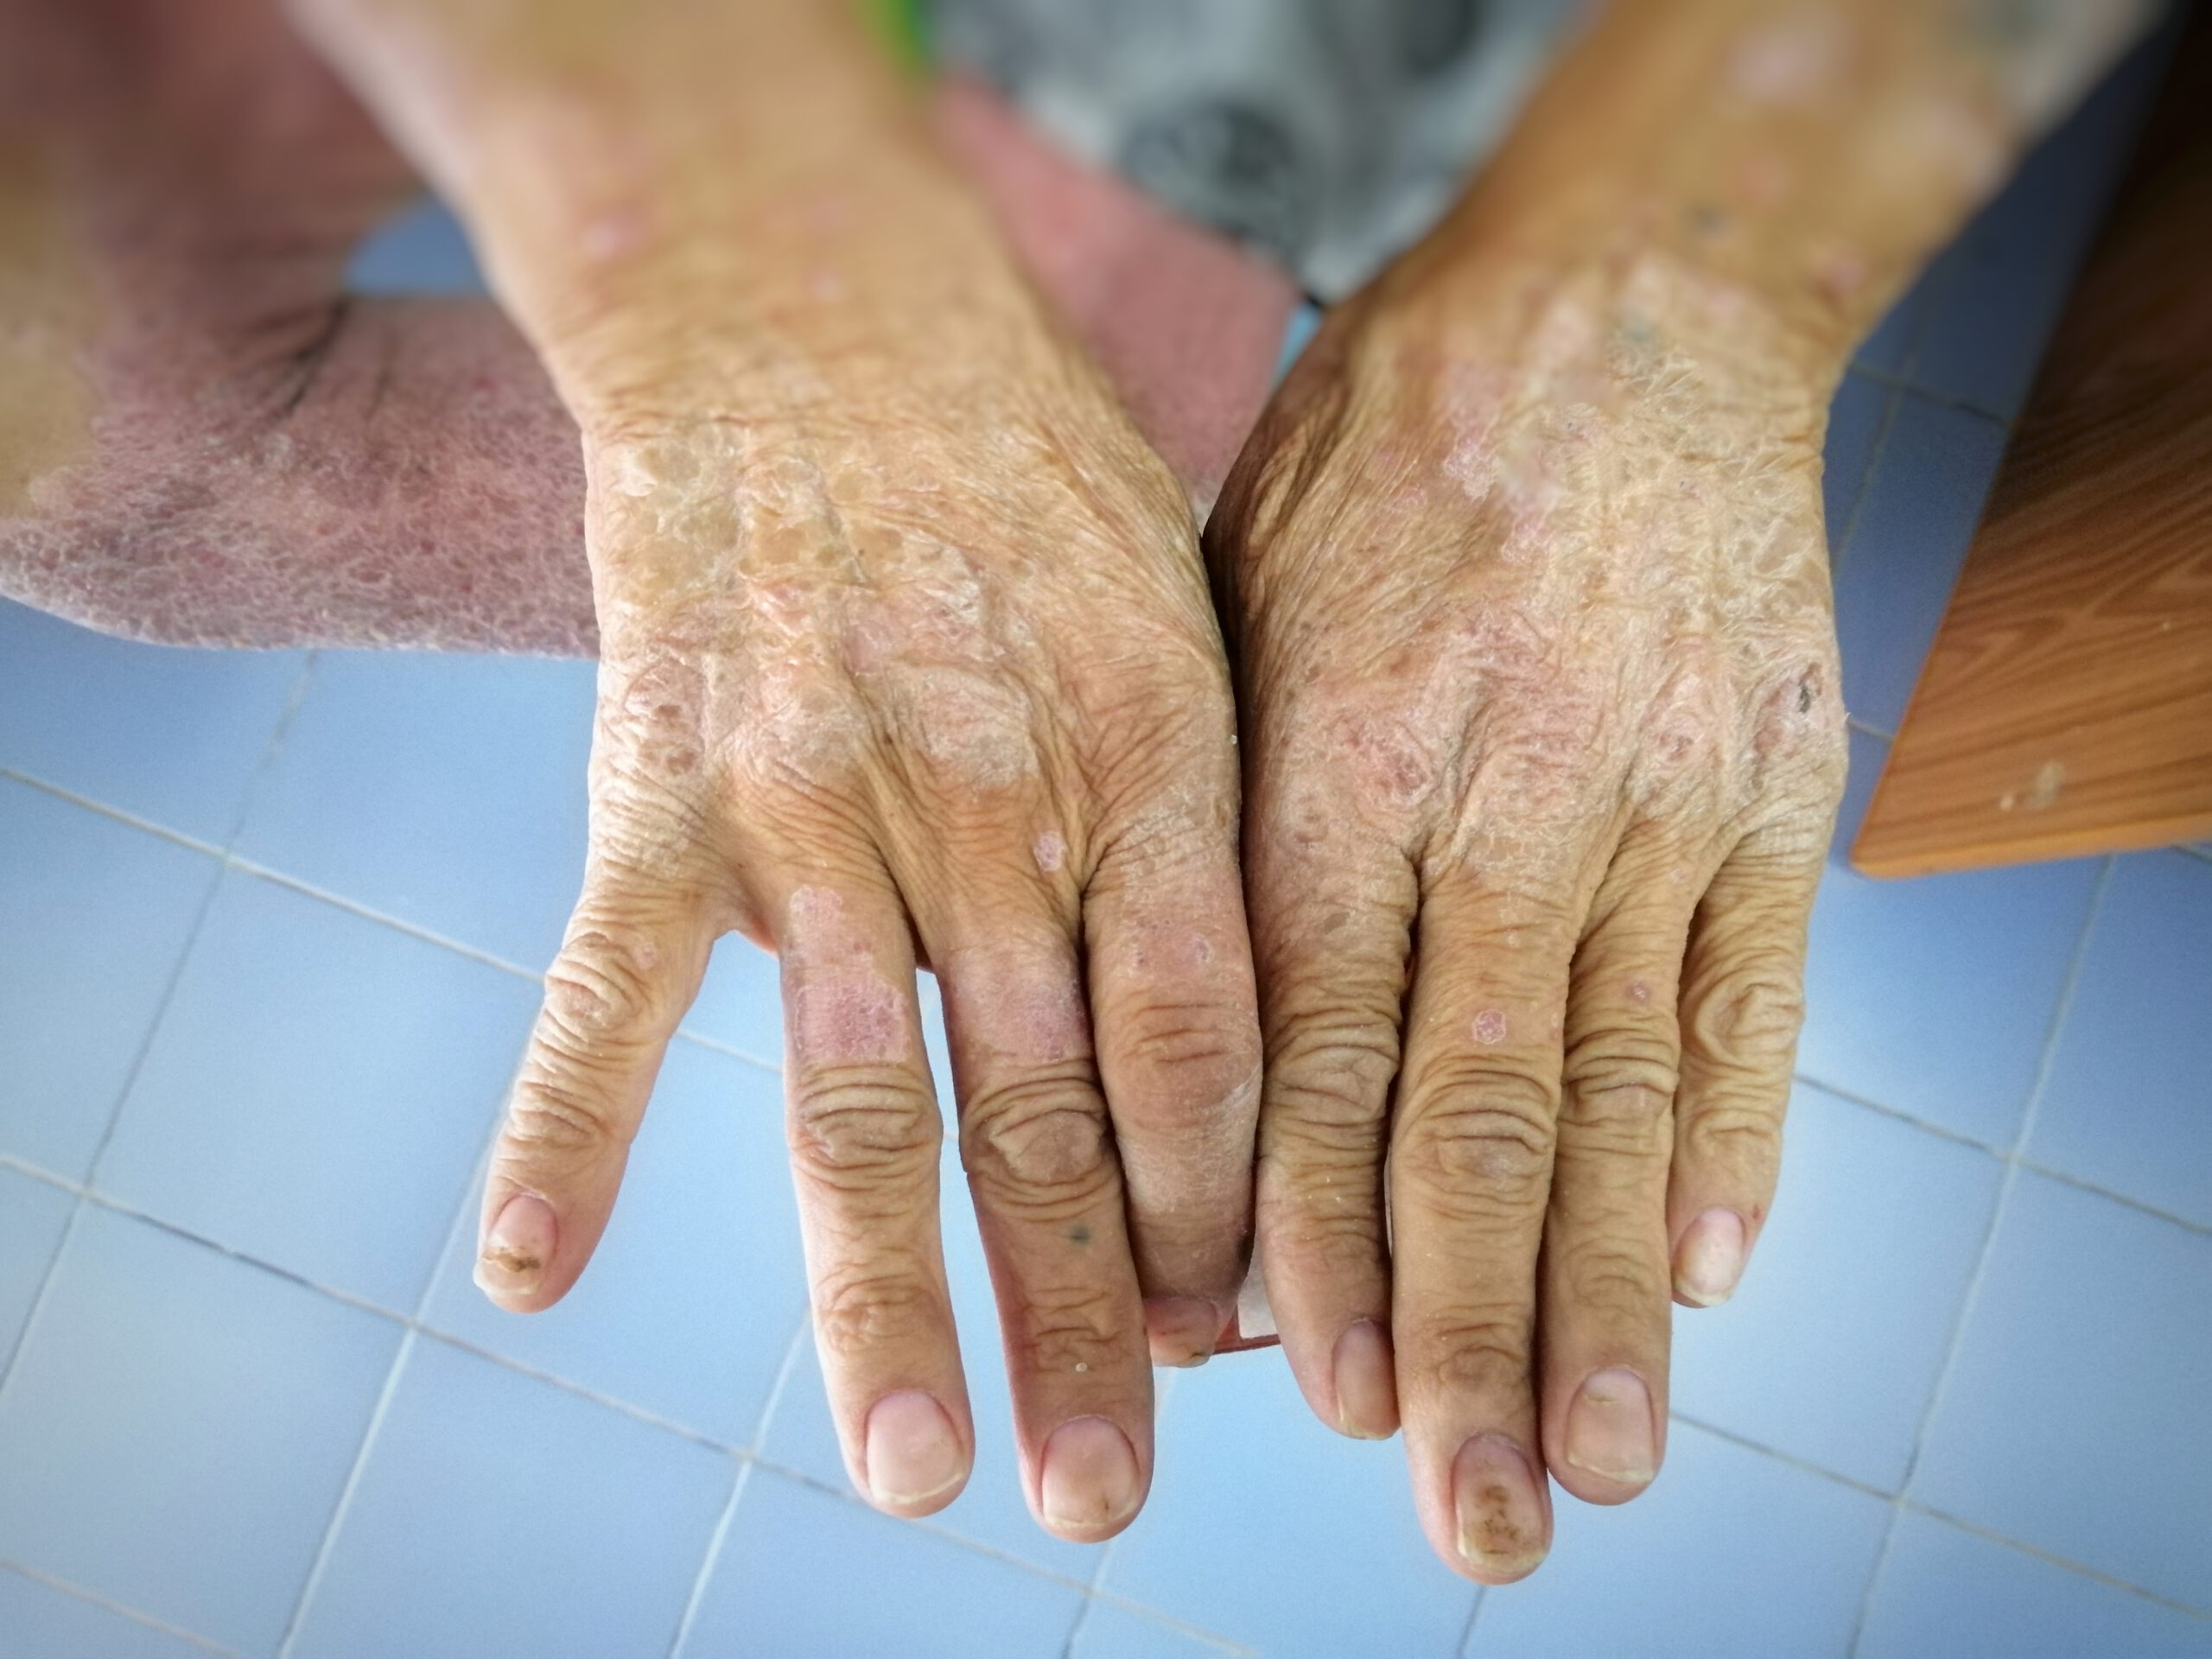 Scleroderma: What Is, Types, Causes, Symptoms, and Diagnosis